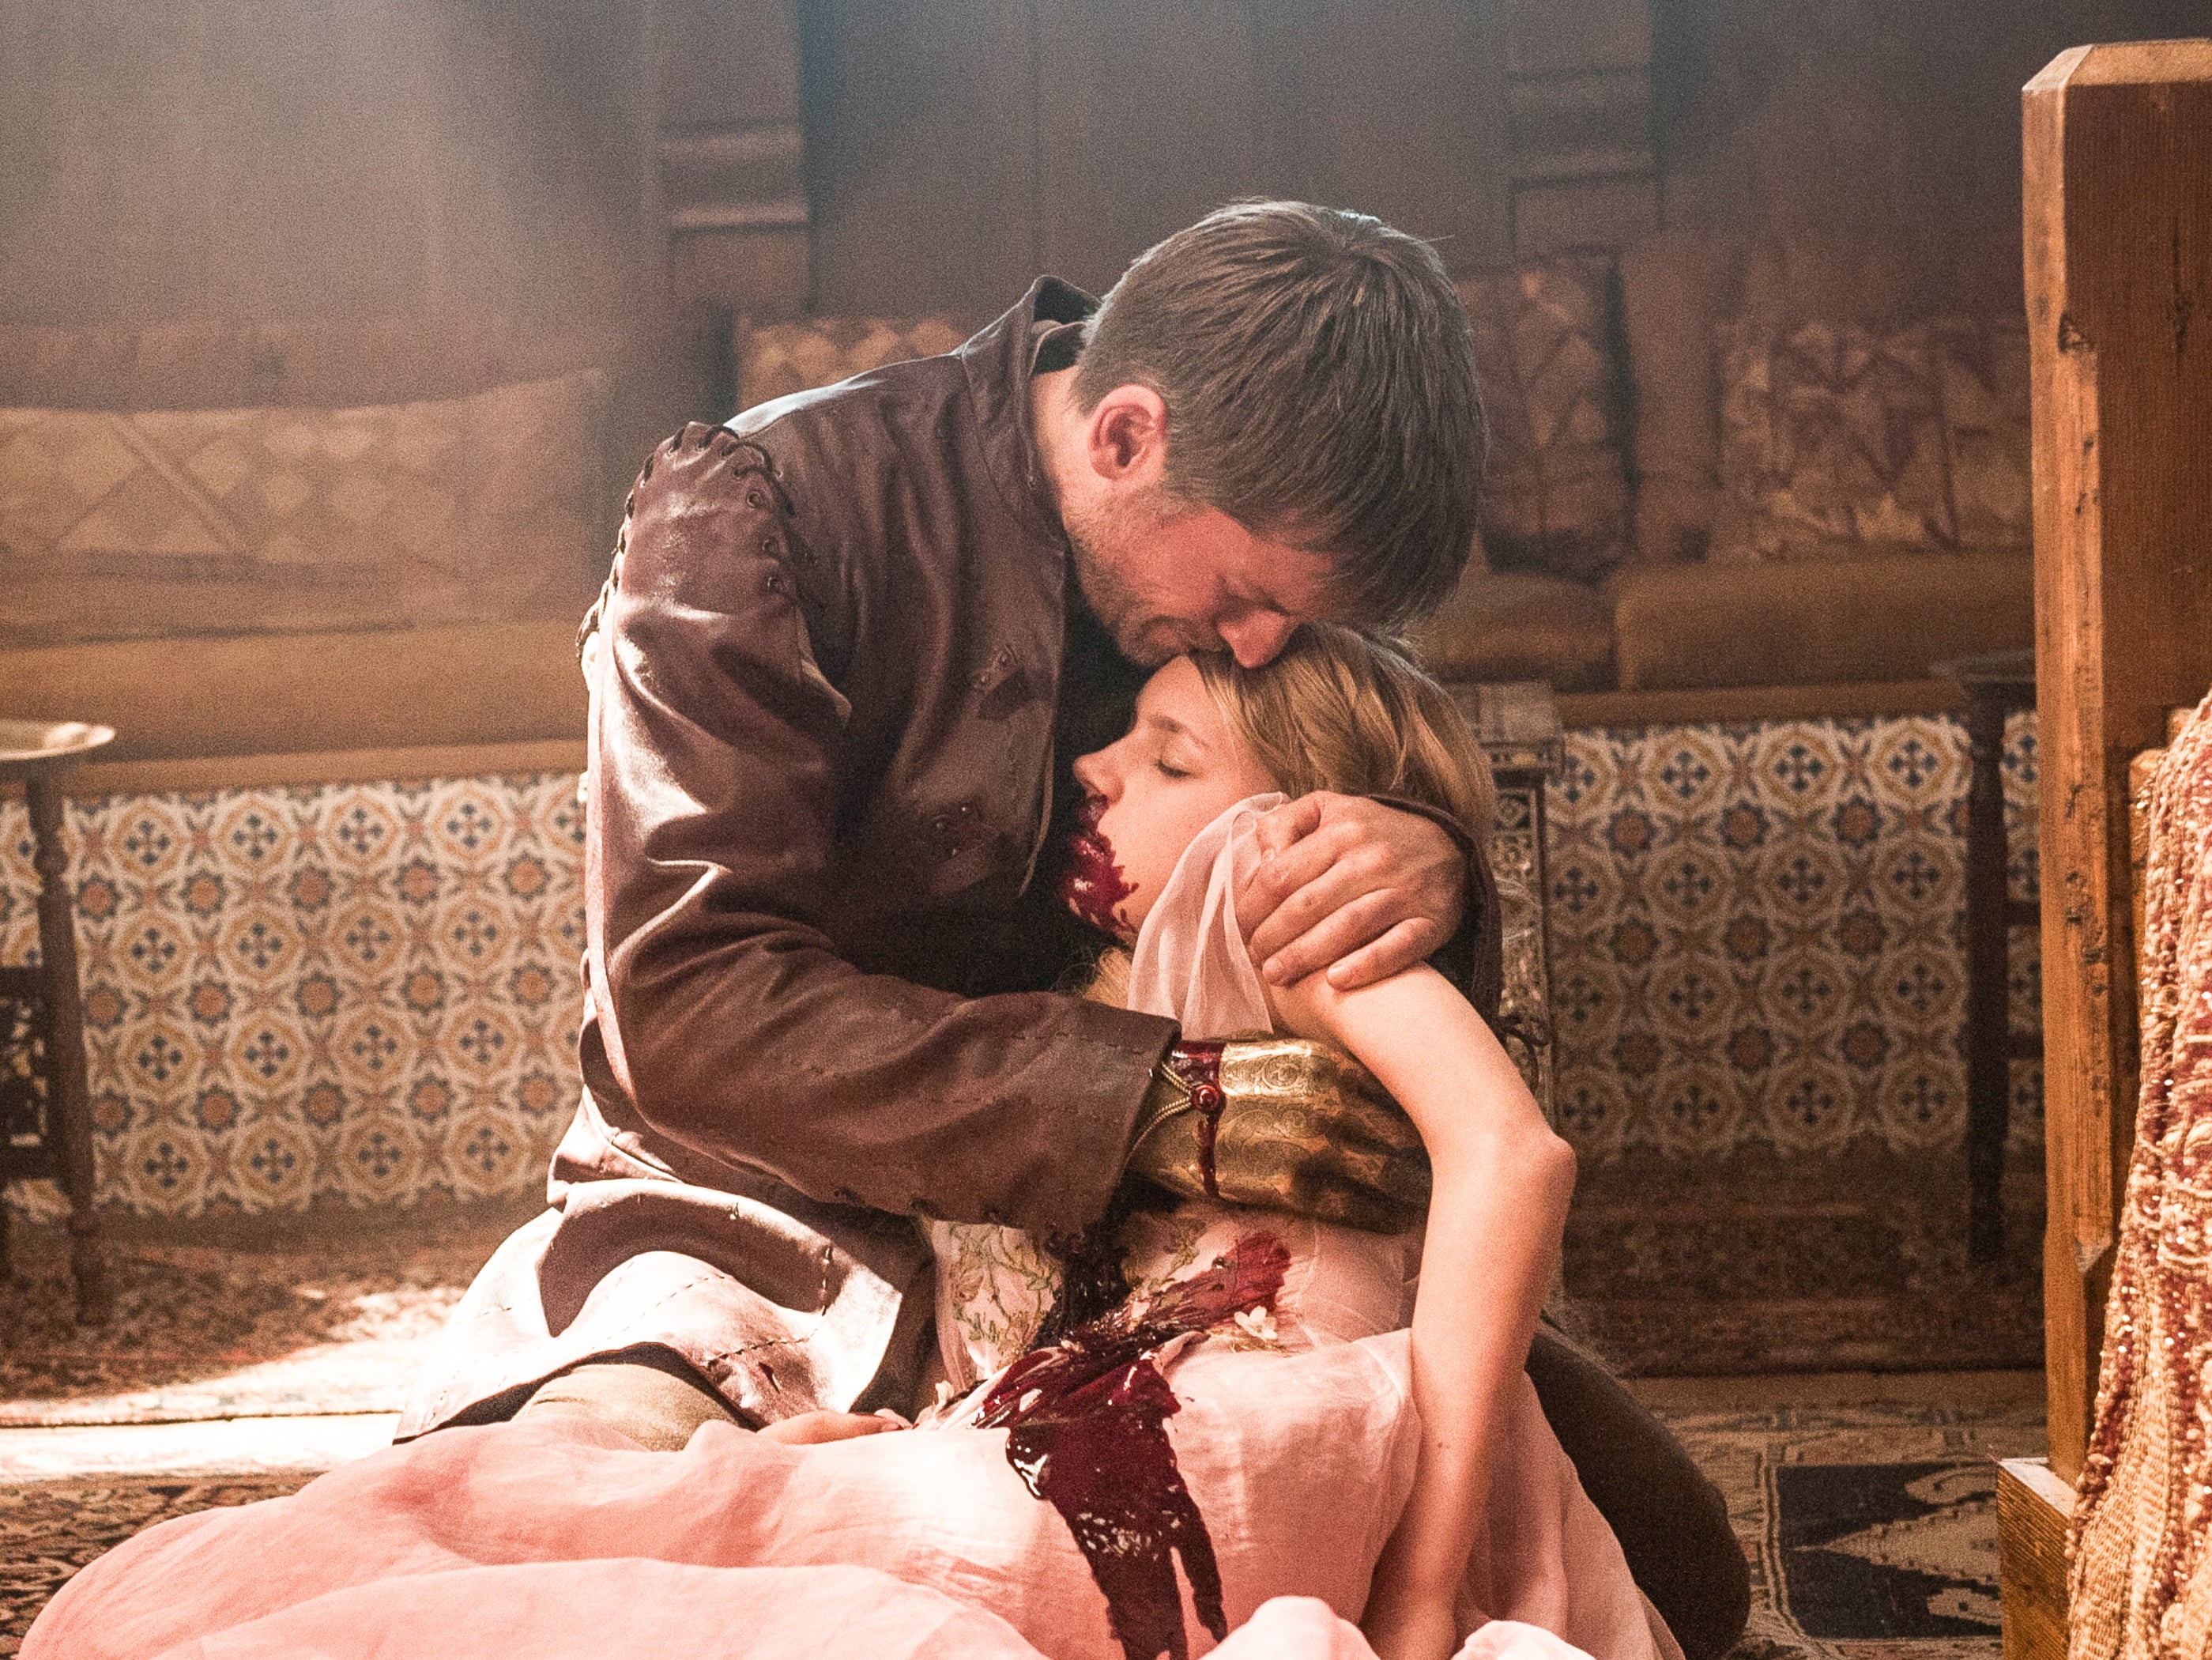 Nikolaj Coster-Waldau and Nell Tiger Free in the ever-bloody fantasy series ‘Game of Thrones'